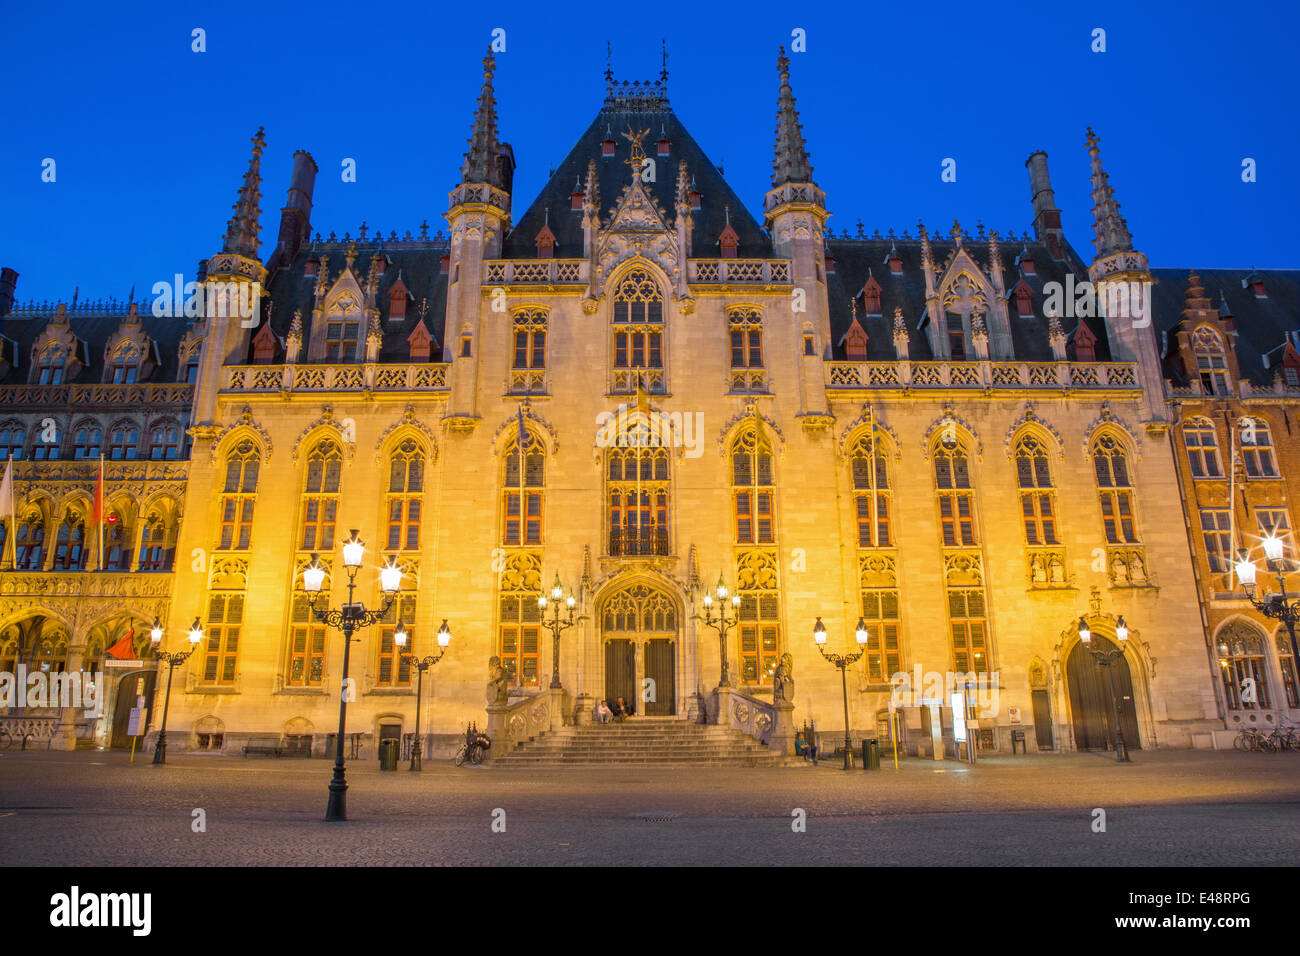 BRUGES, BELGIUM - JUNE 11, 2014: The Grote Markt and the Provinciaal Hof gothic building in evening light. Stock Photo